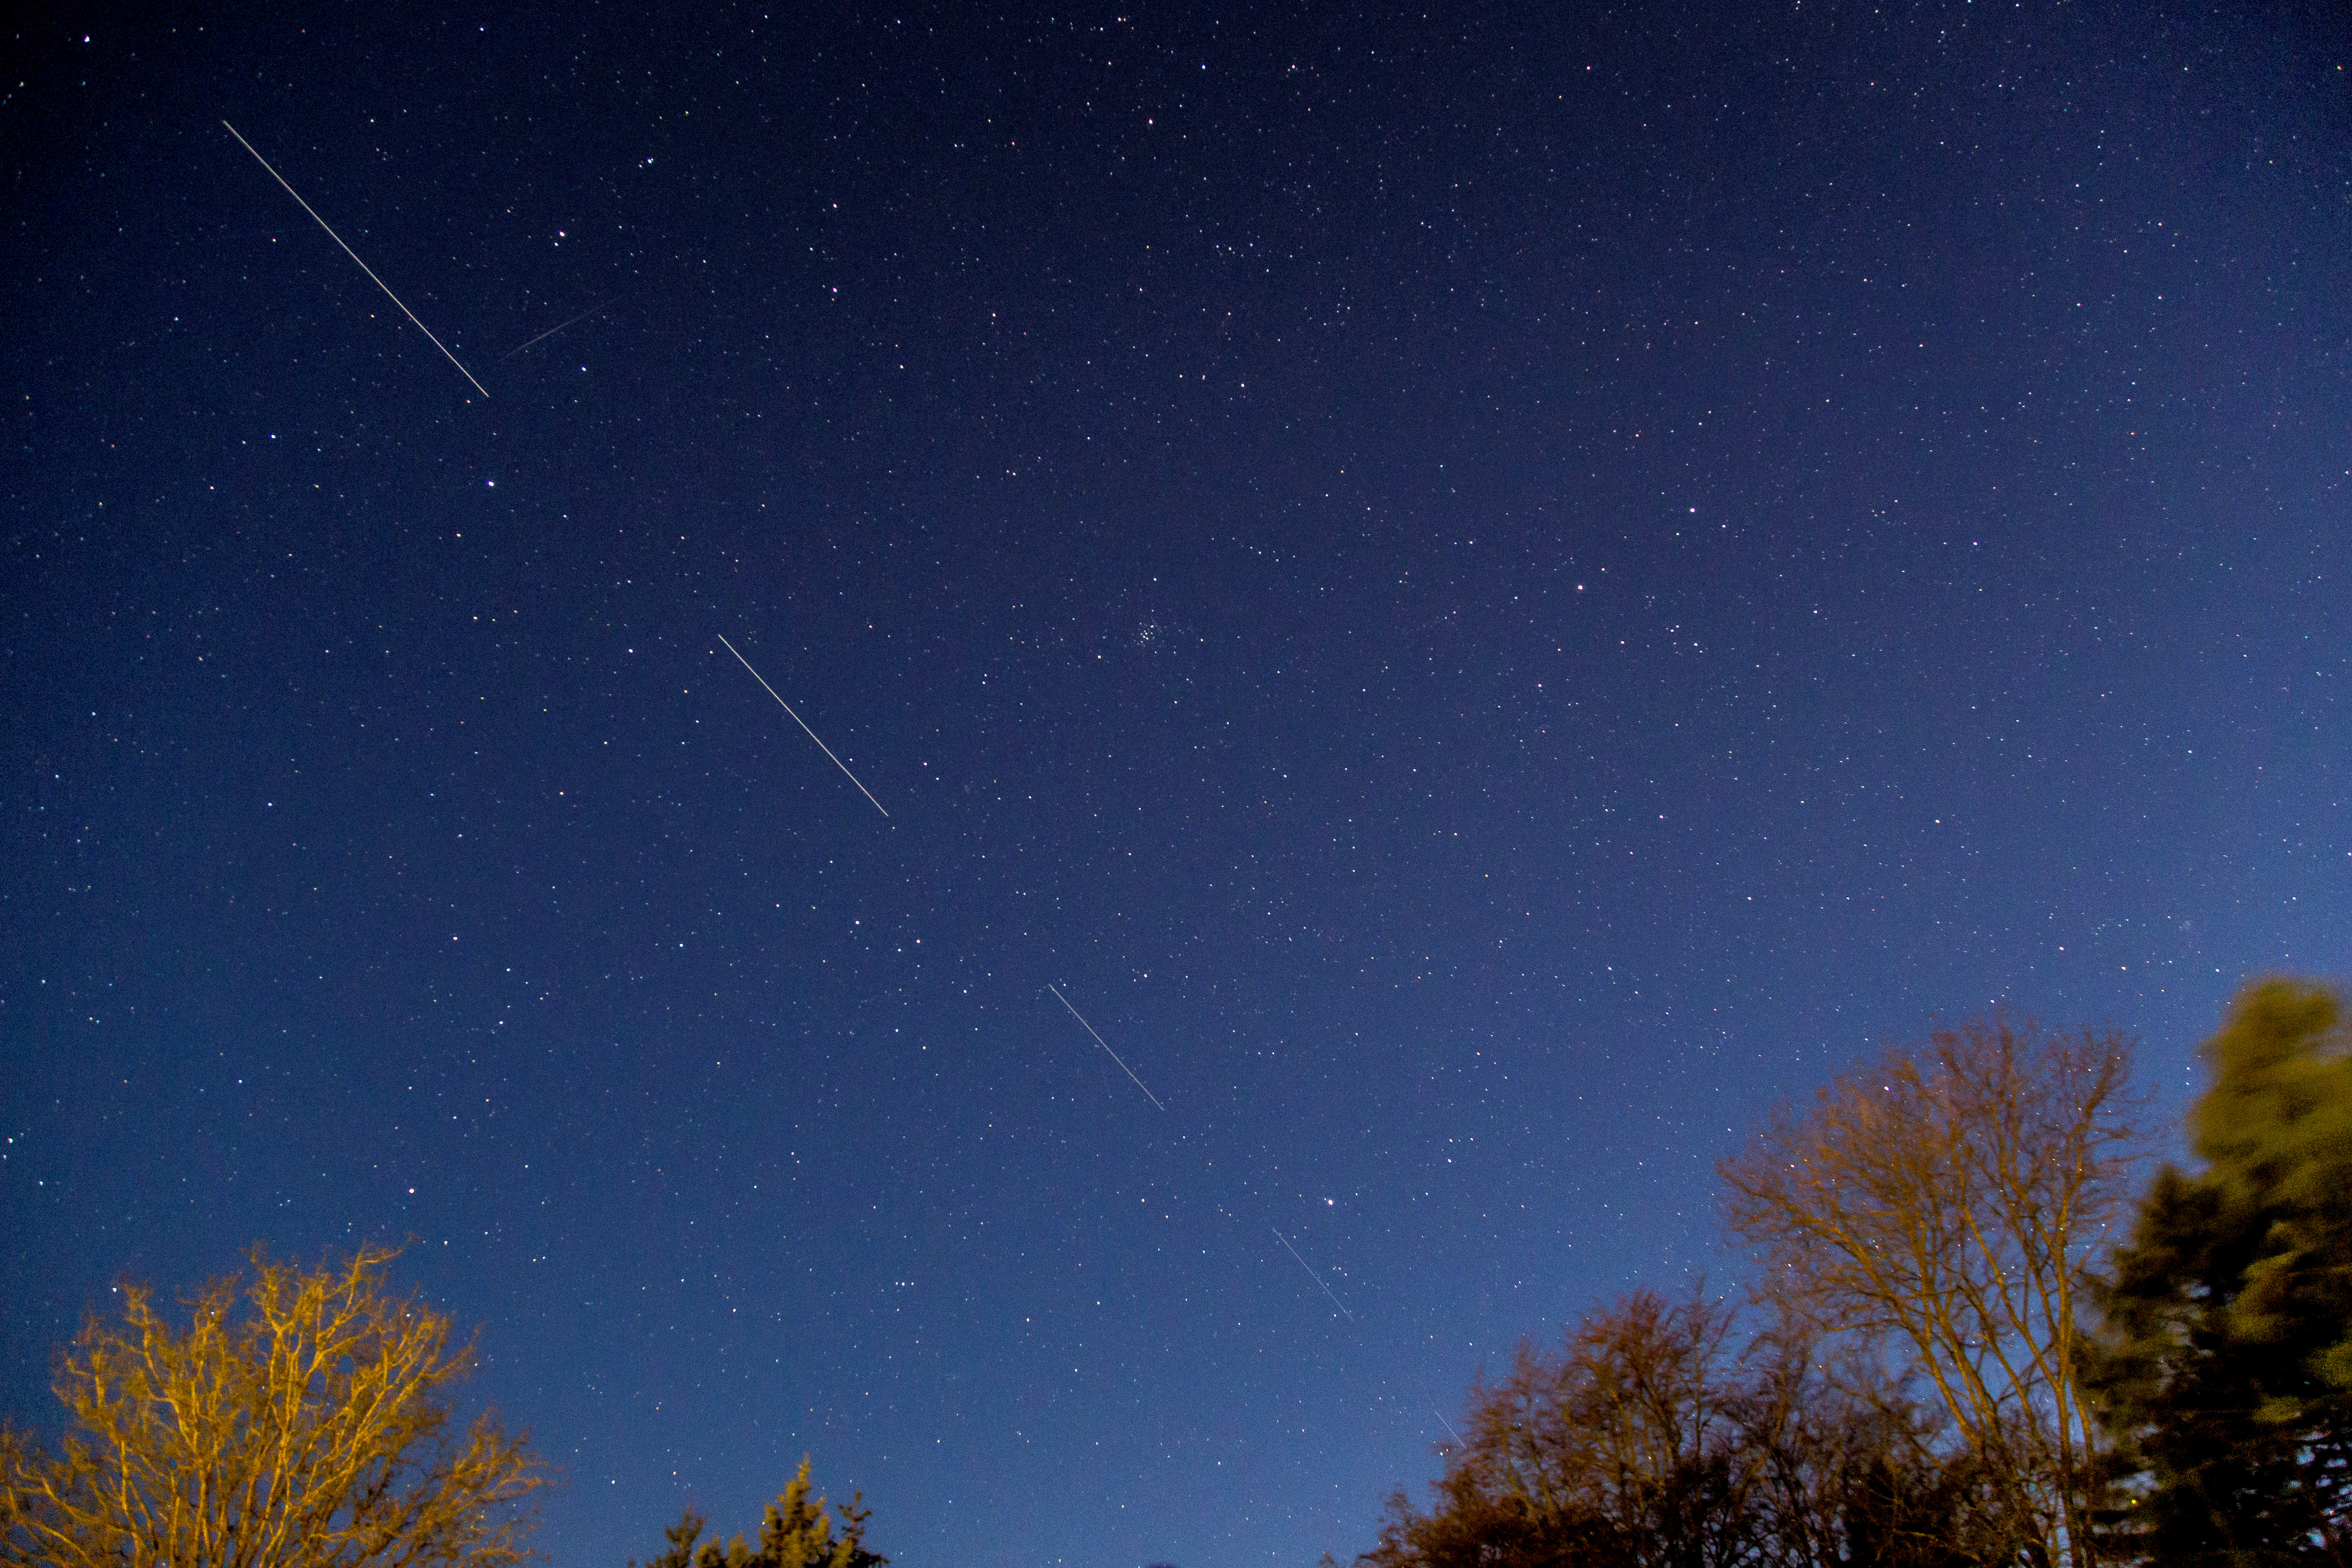 SpaceX Starlink 5 satellites are pictured in the sky seen from Svendborg